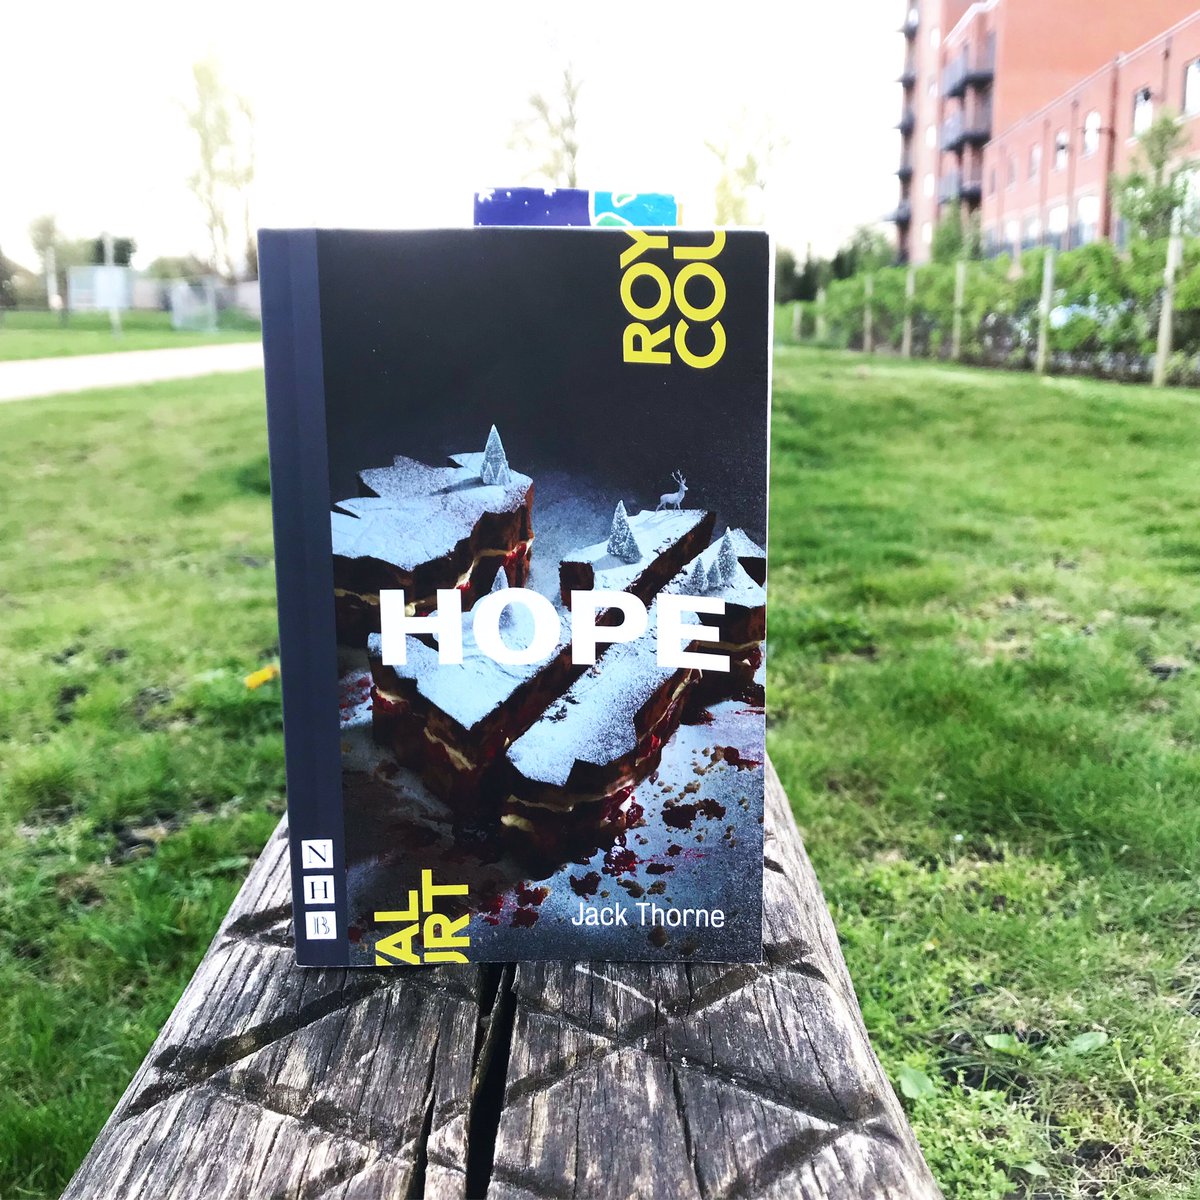 Play No 985 - Hope by Jack Thorne. An urgent political play - this is a funny and scathing fable attacking the squeeze on local government. #playreading #Hope #JackThorne